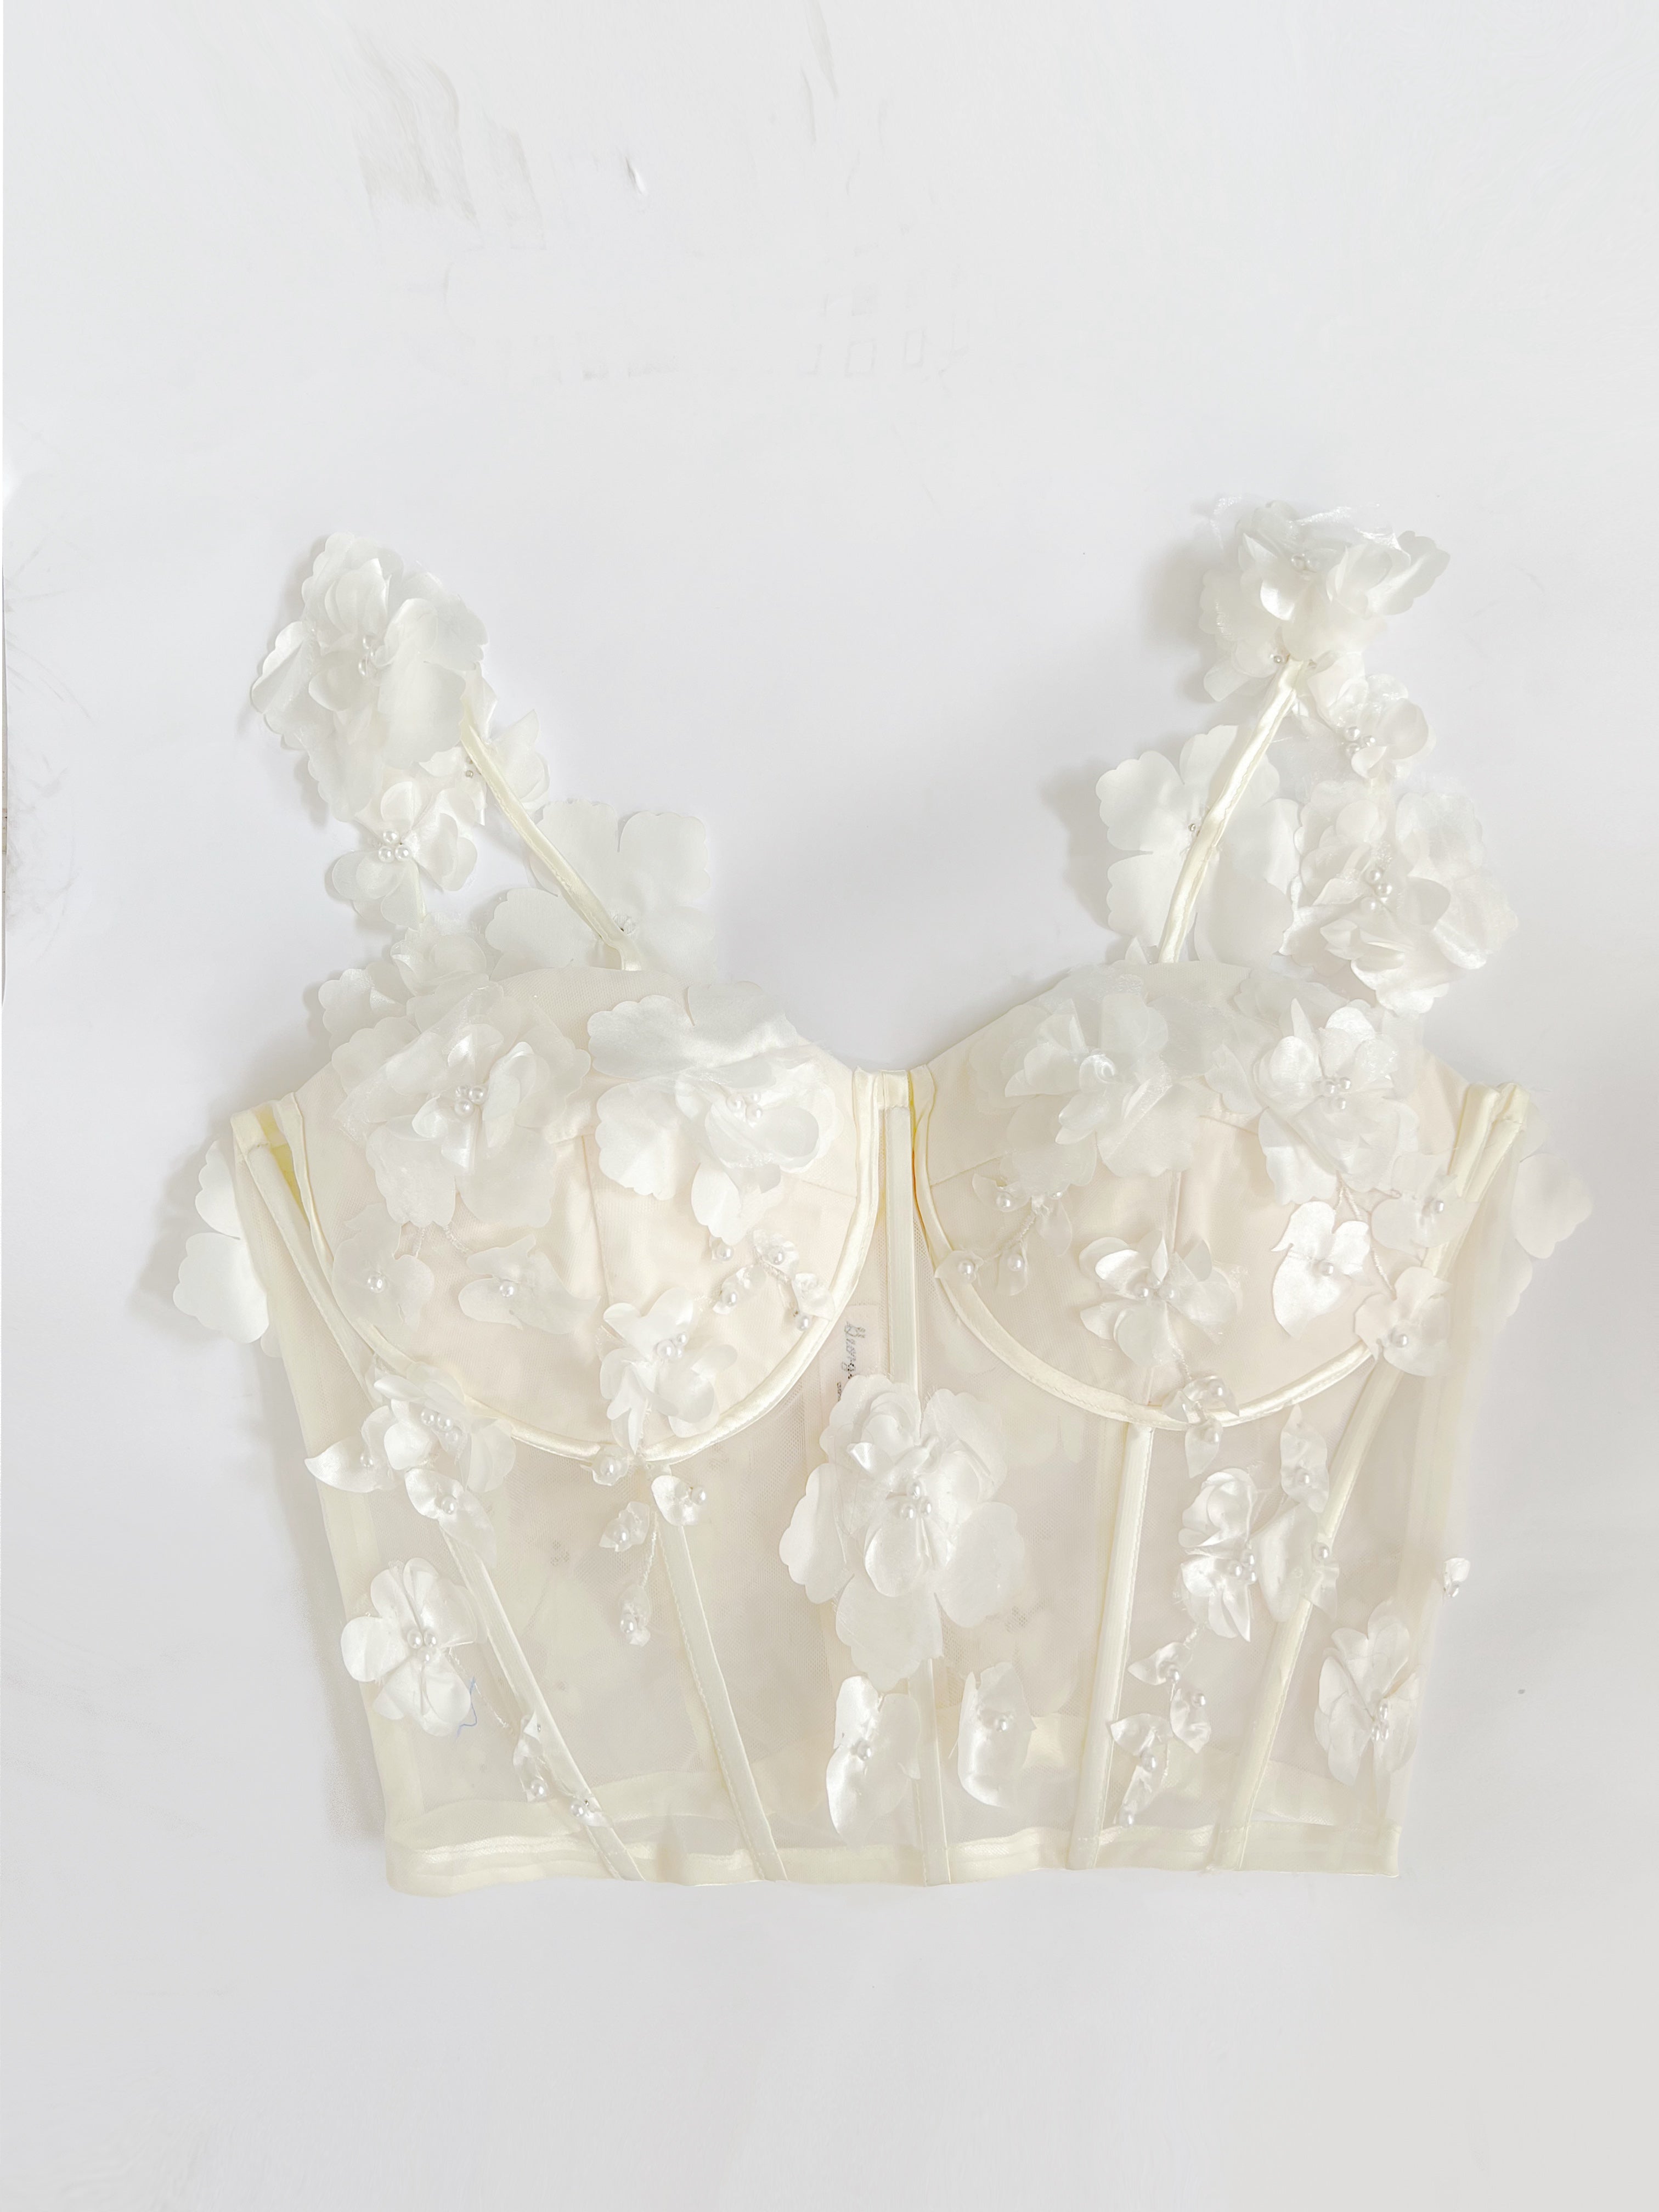 Ivory Long Rose Bustier with Embroidered Straps Size 14 Cup C IMMEDIATE SHIPPING/DELIVERY